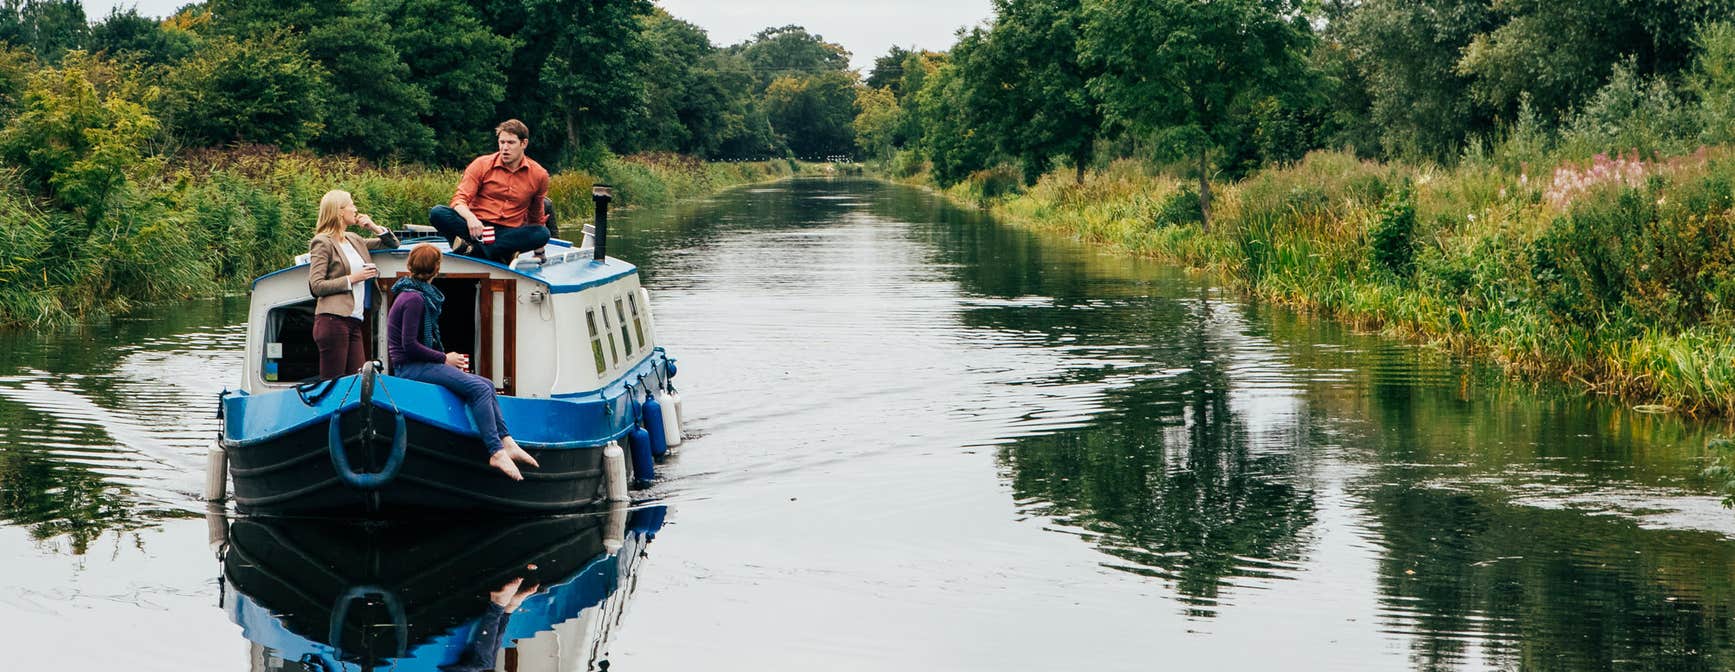 People on a barge in a canal in County Kildare